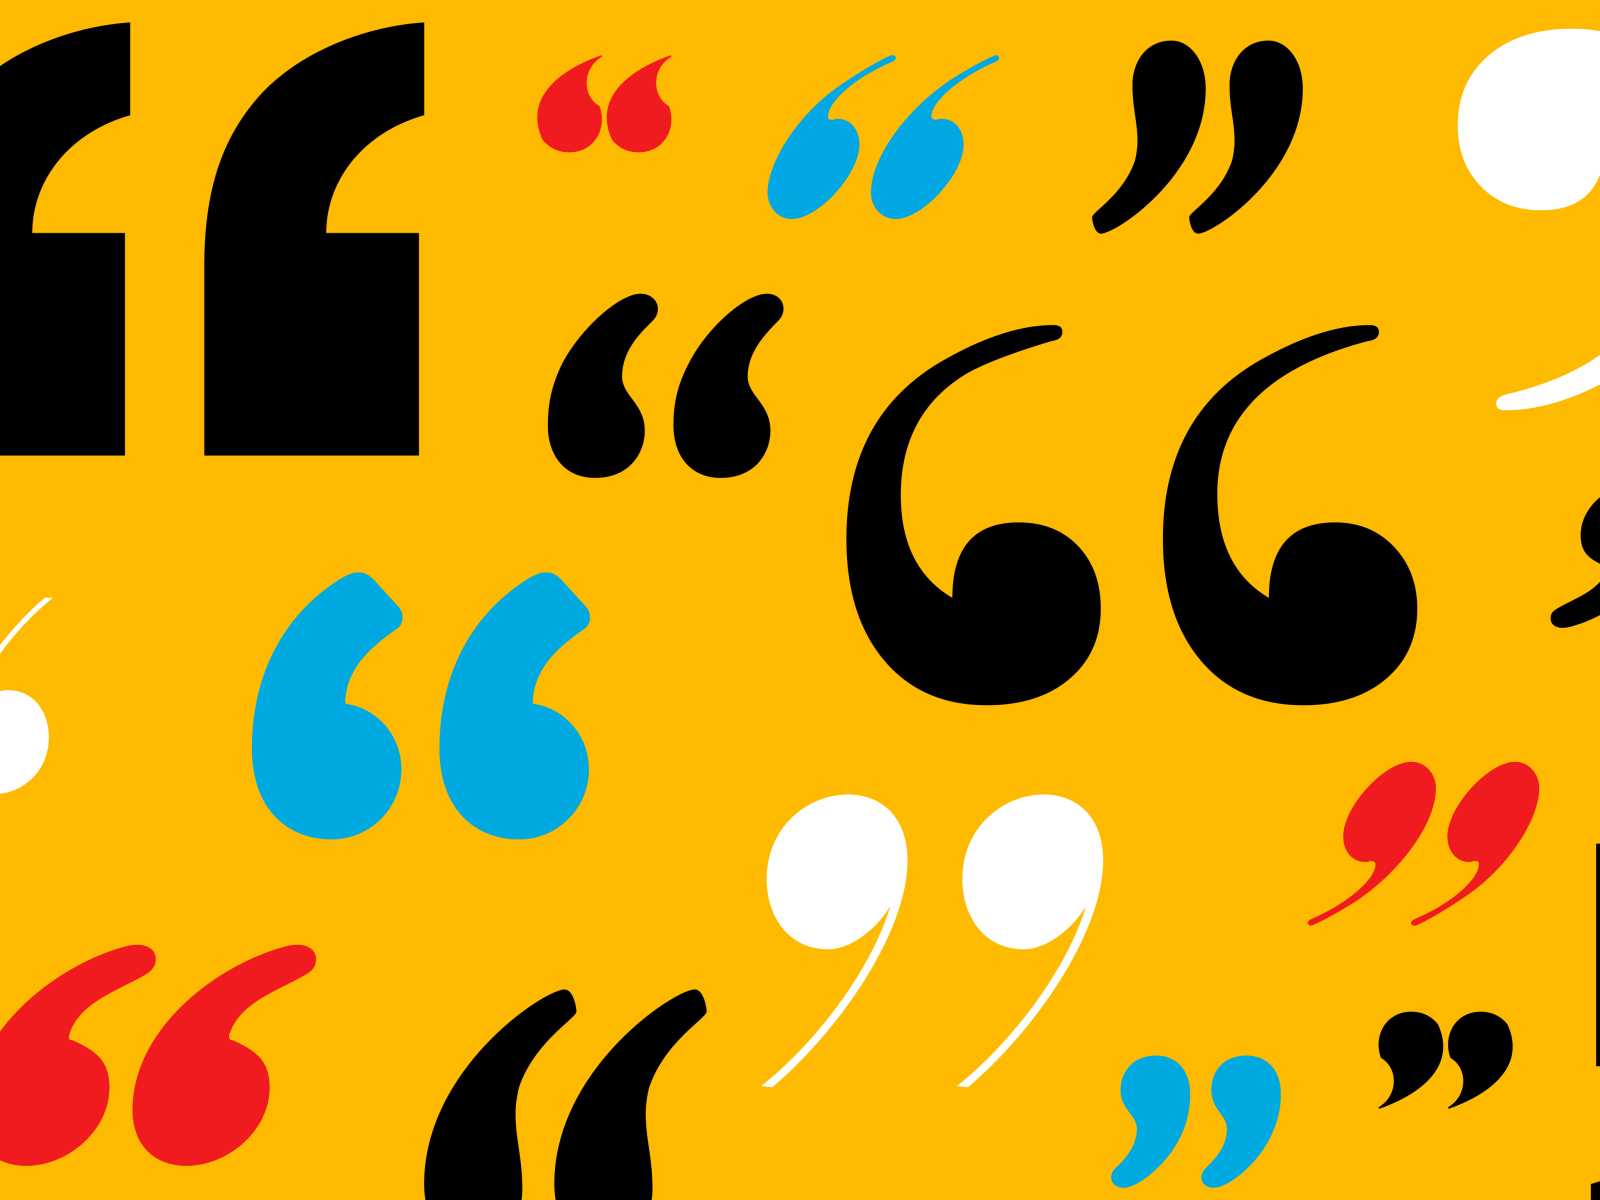 5 More Sneaky Typography Errors to Watch Out For en dash em dash dashes quotes article learning graphic design fonts font typography type design